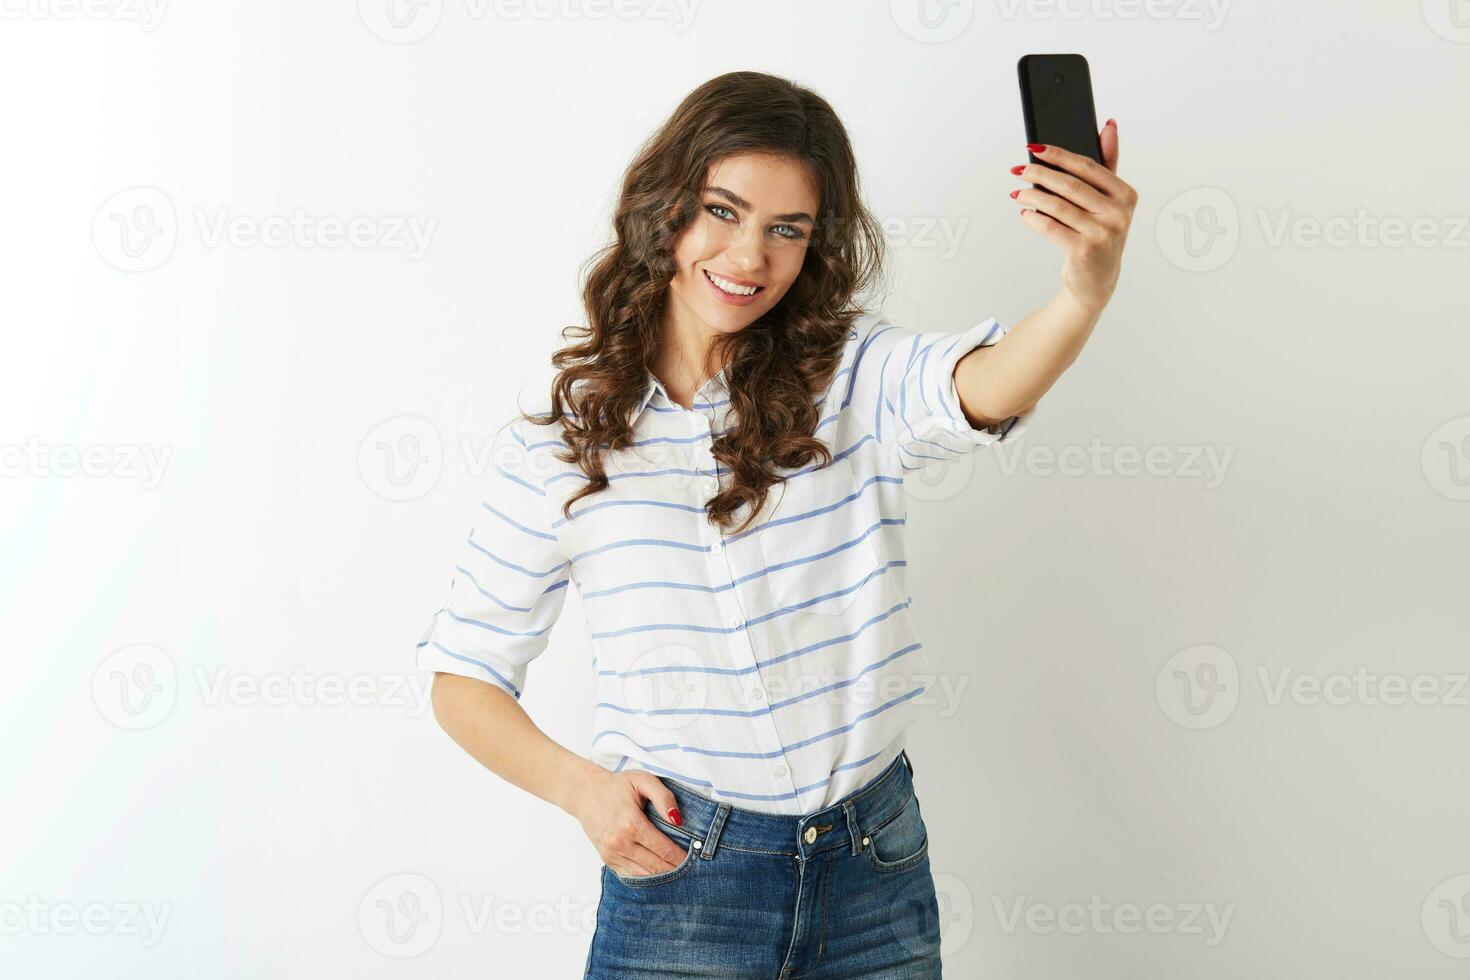 beautiful woman making selfie photo on mobile phone, smiling, happy, islolated, curly hair, positive mood, looking in camera, attractive model posing